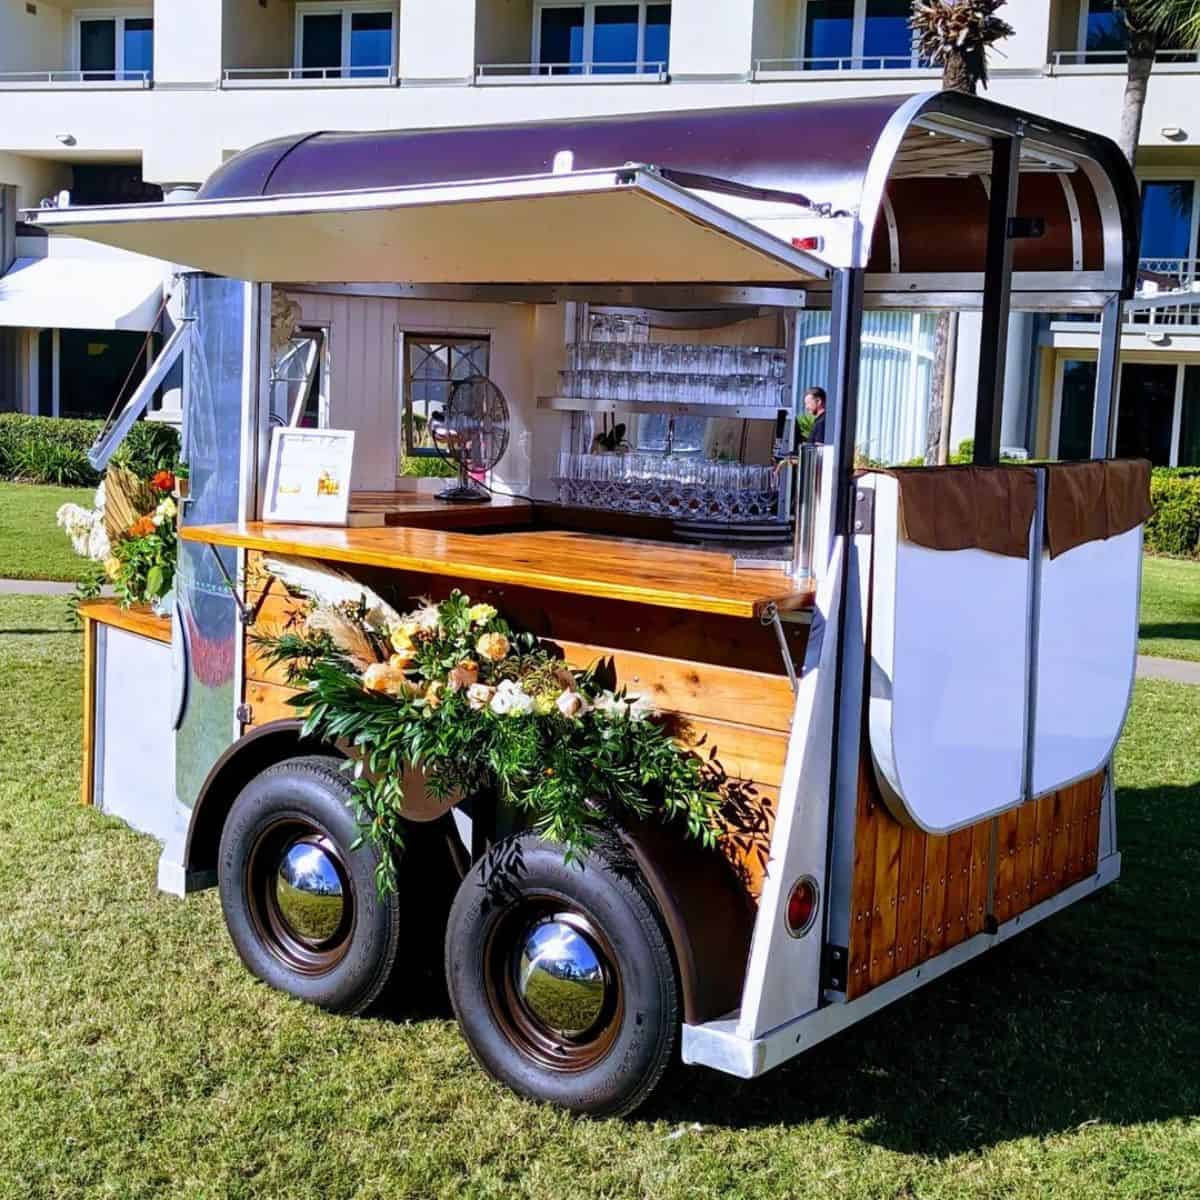 A rustic horse trailer rebuilded as a small bar.